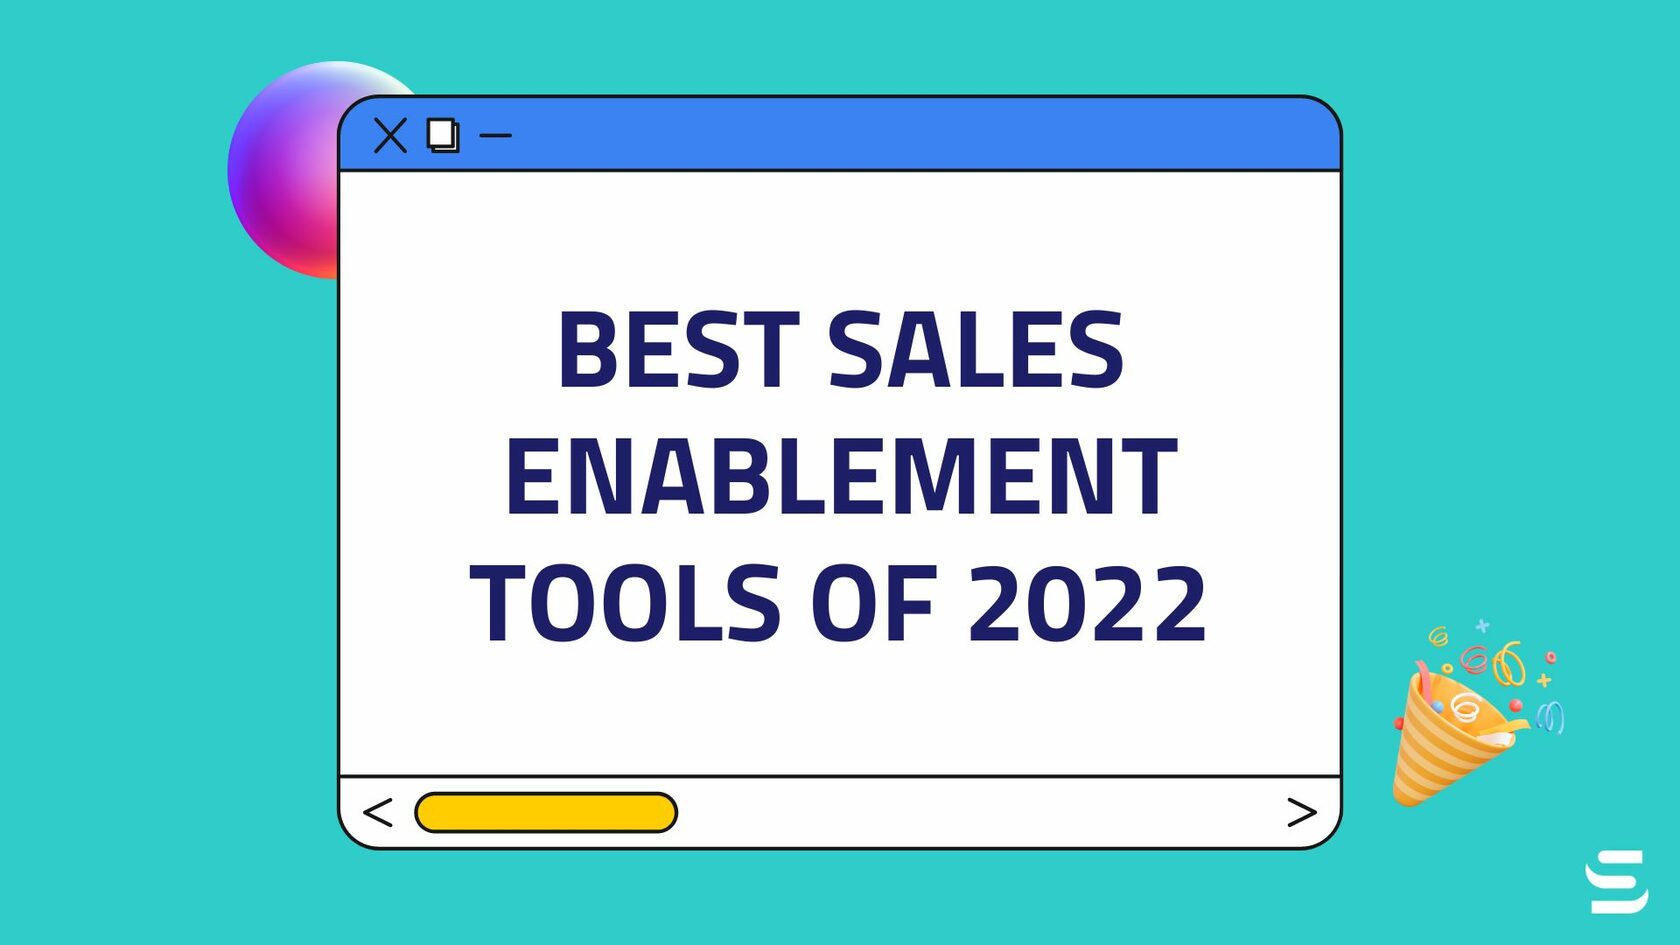 Best Sales Enablement Tools of 2022